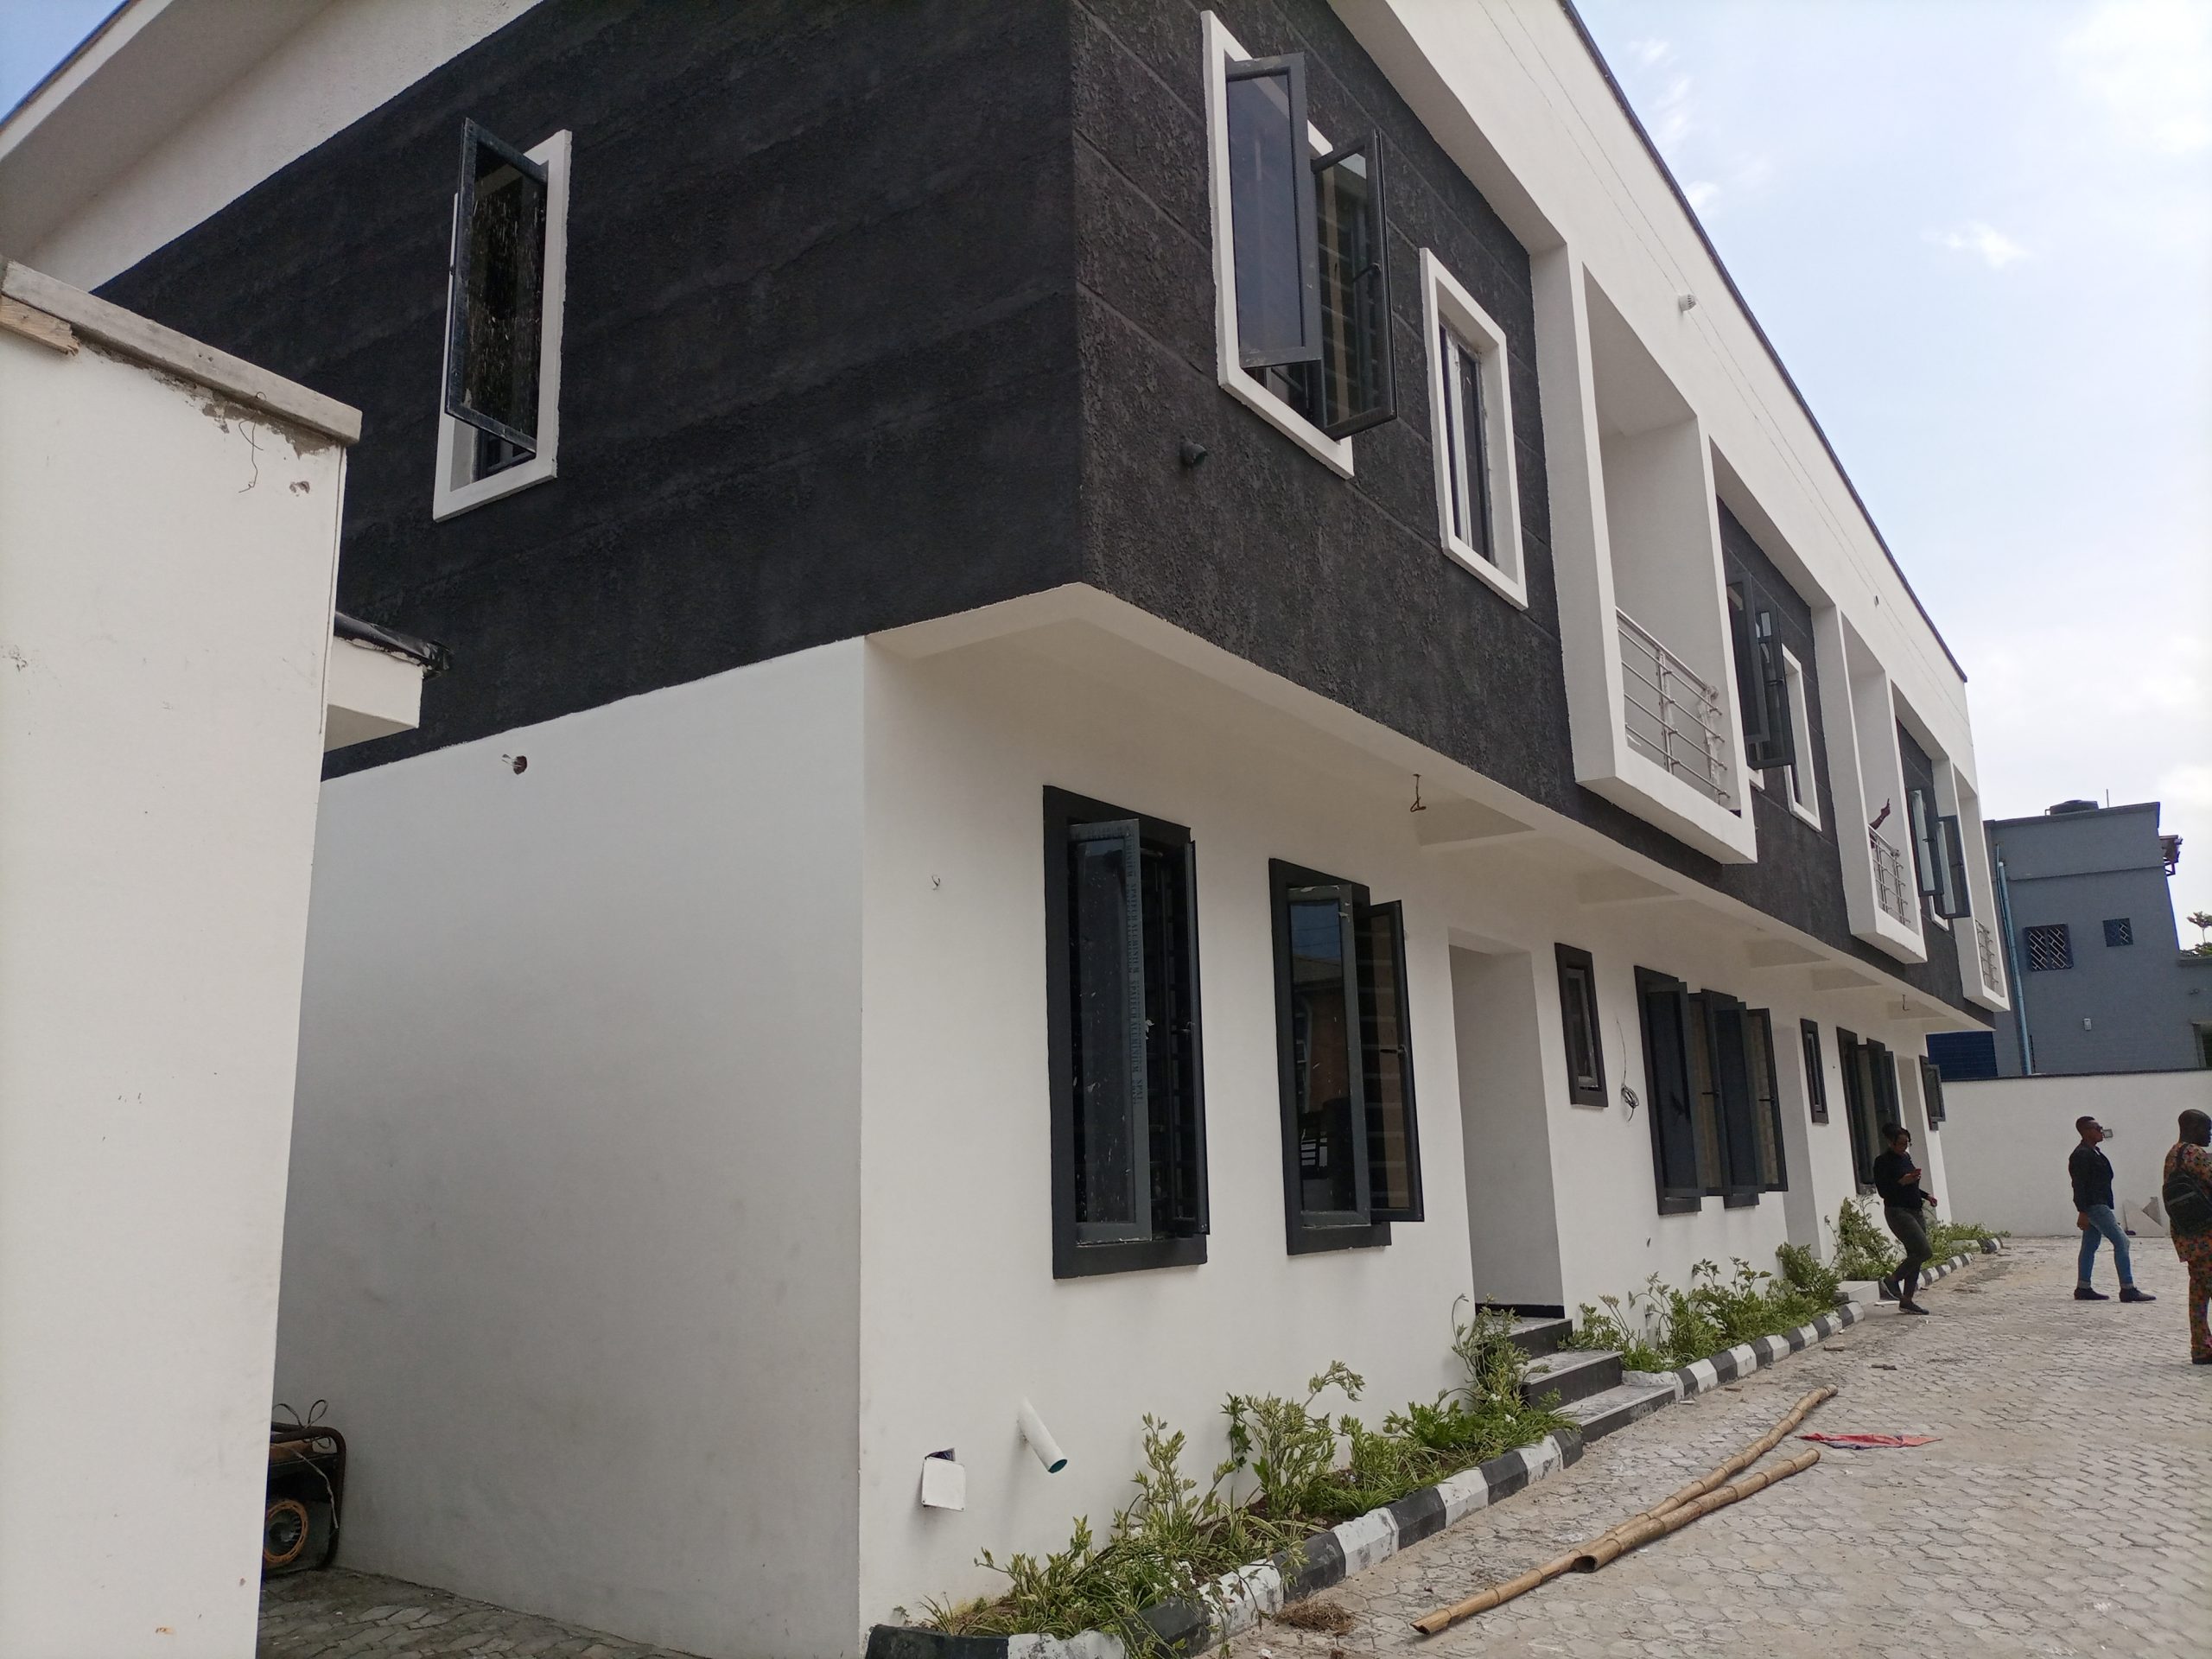 4 Bedroom Duplex For Sale in Ajah with 6 months installment at Vintage Court